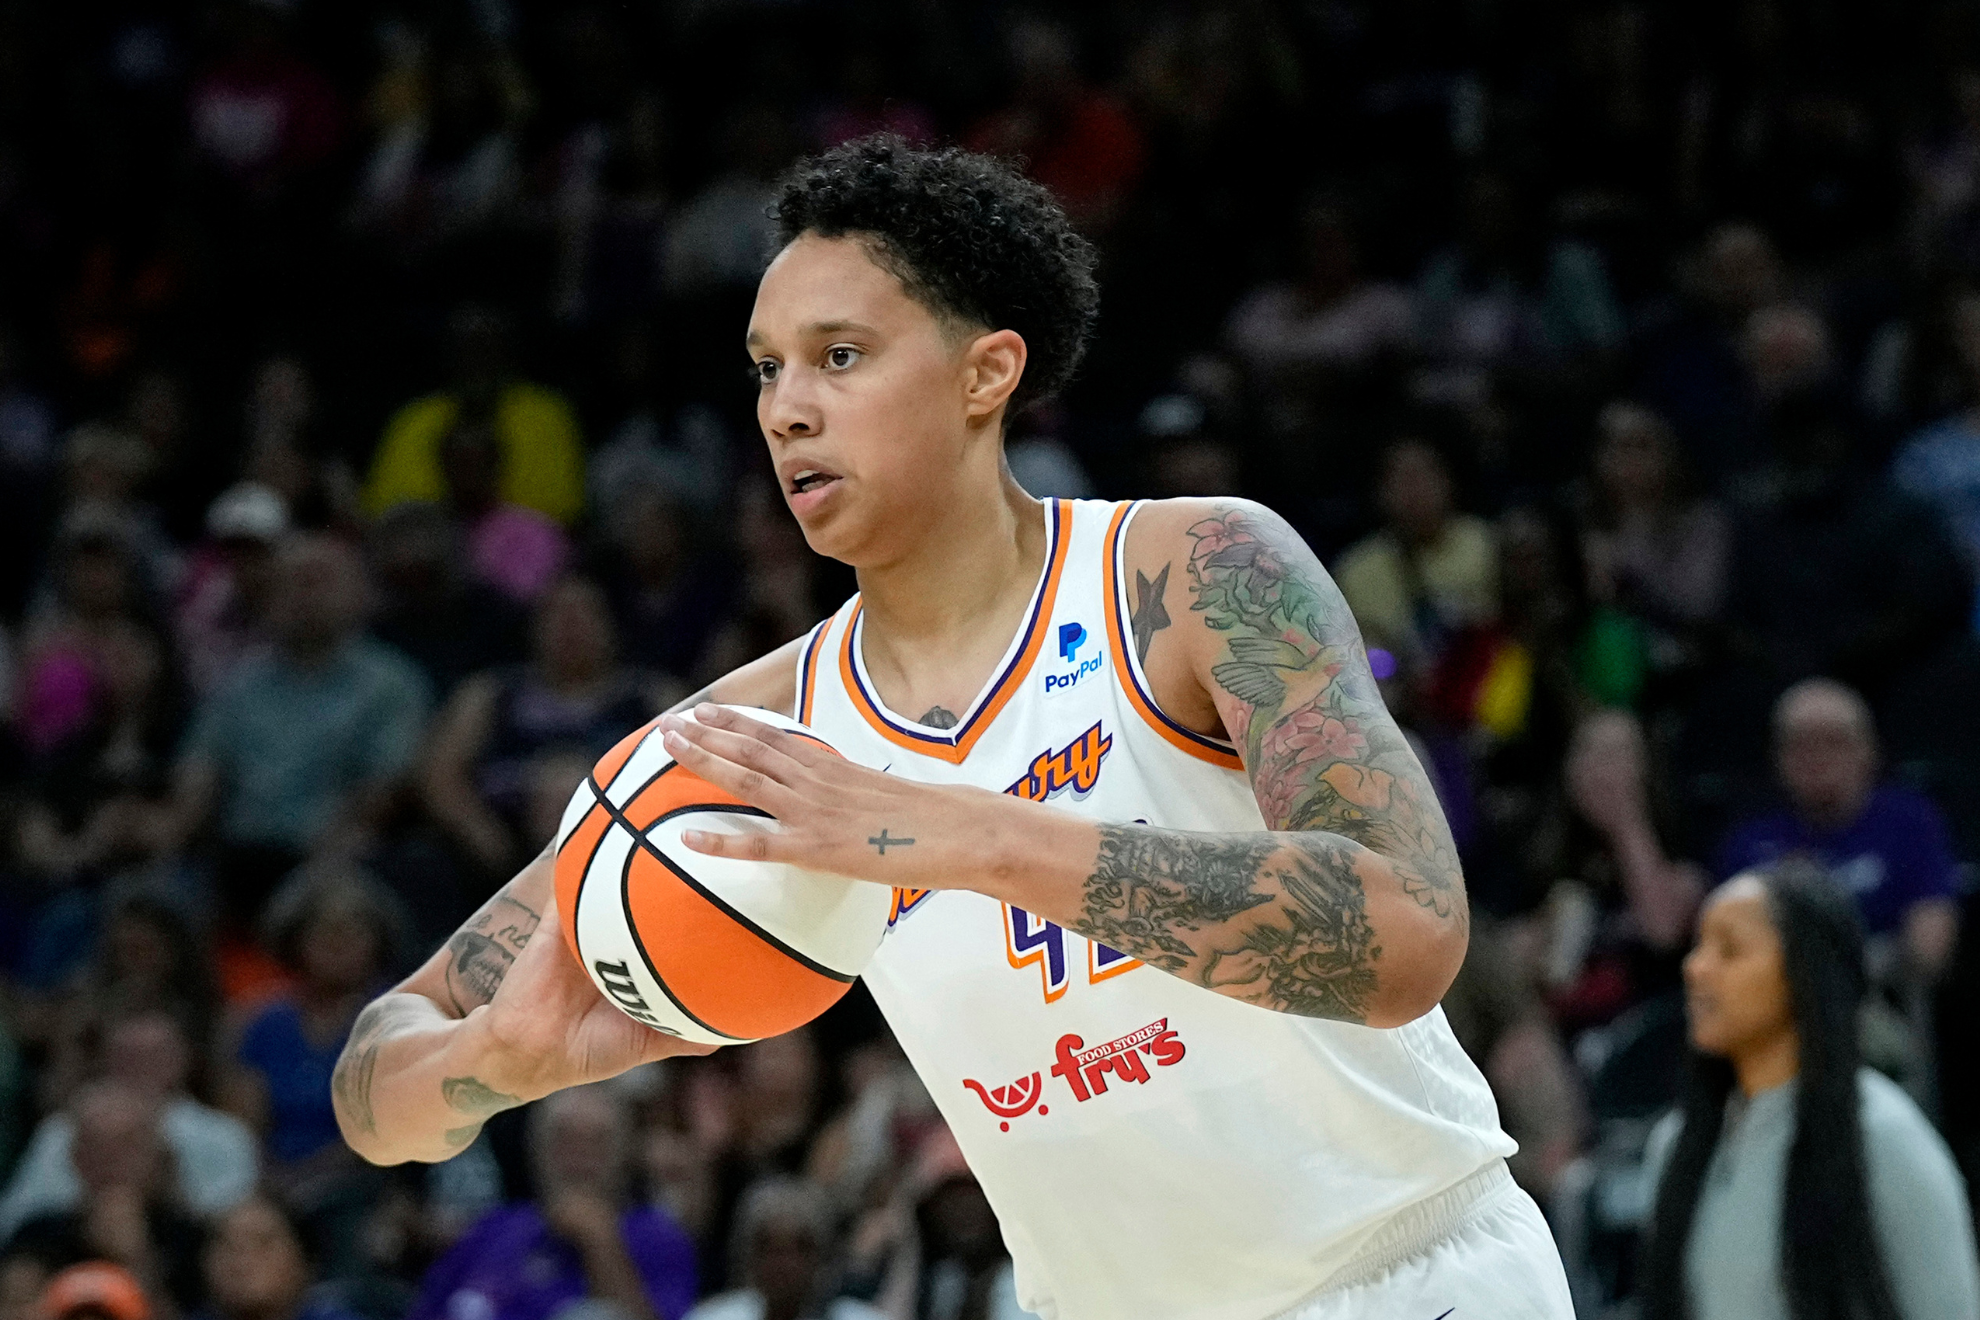 Griner returned to the WNBA and picked up where she left off prior to her detainment.